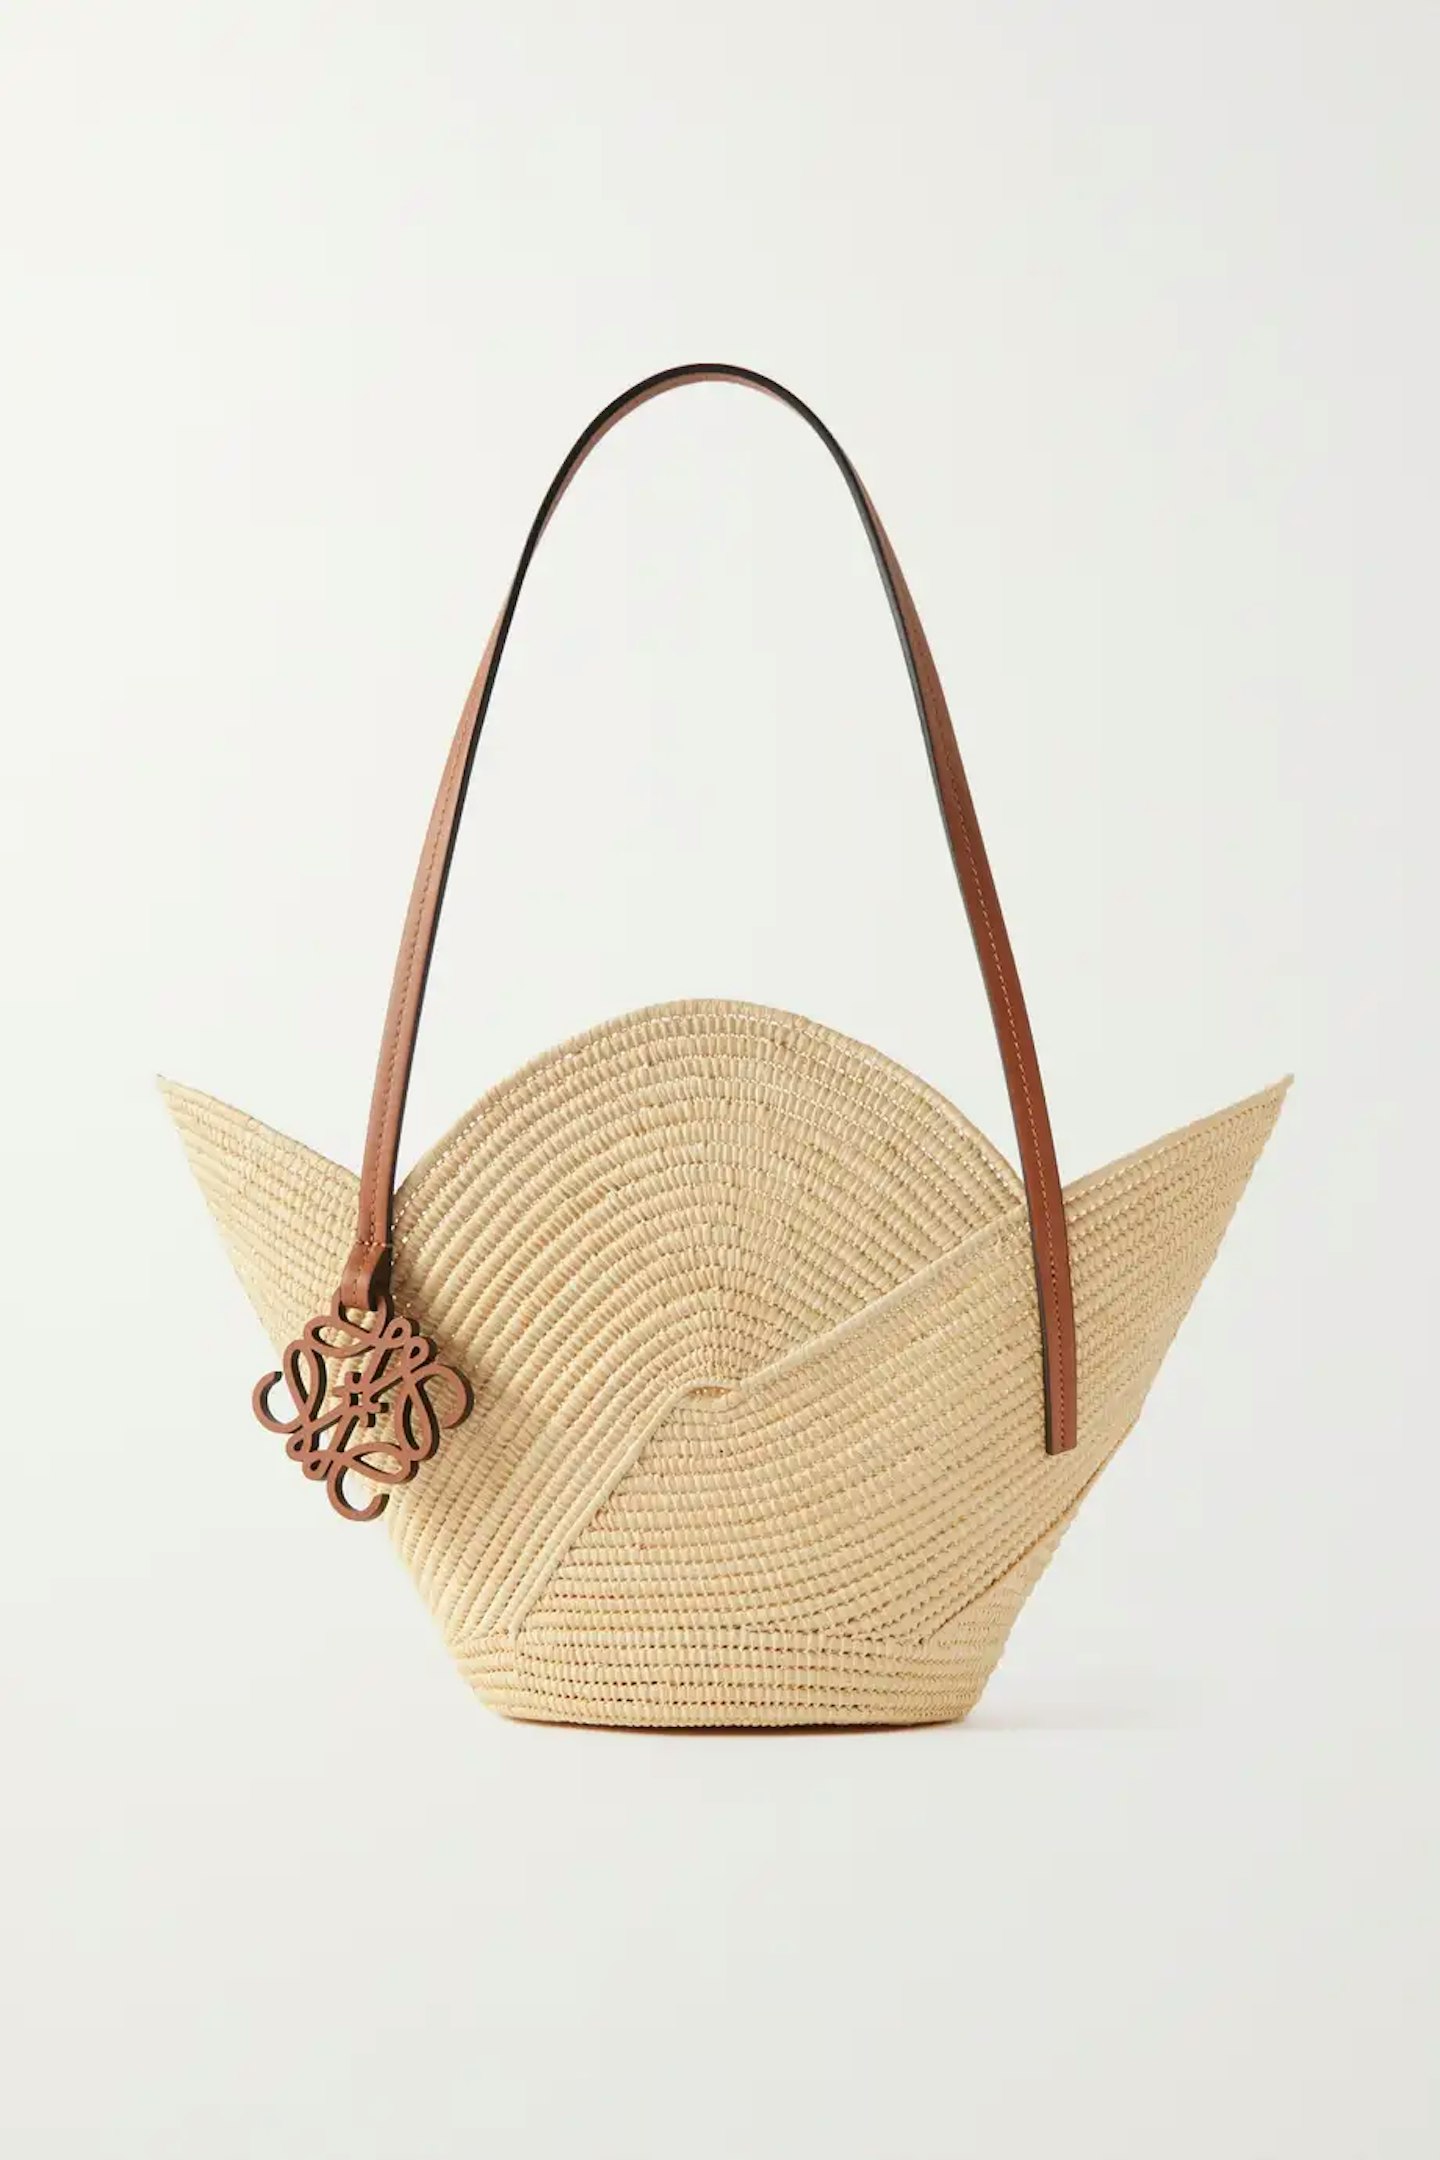 The Best Woven Straw Basket for the Stylish Woman｜Ganapati Crafts